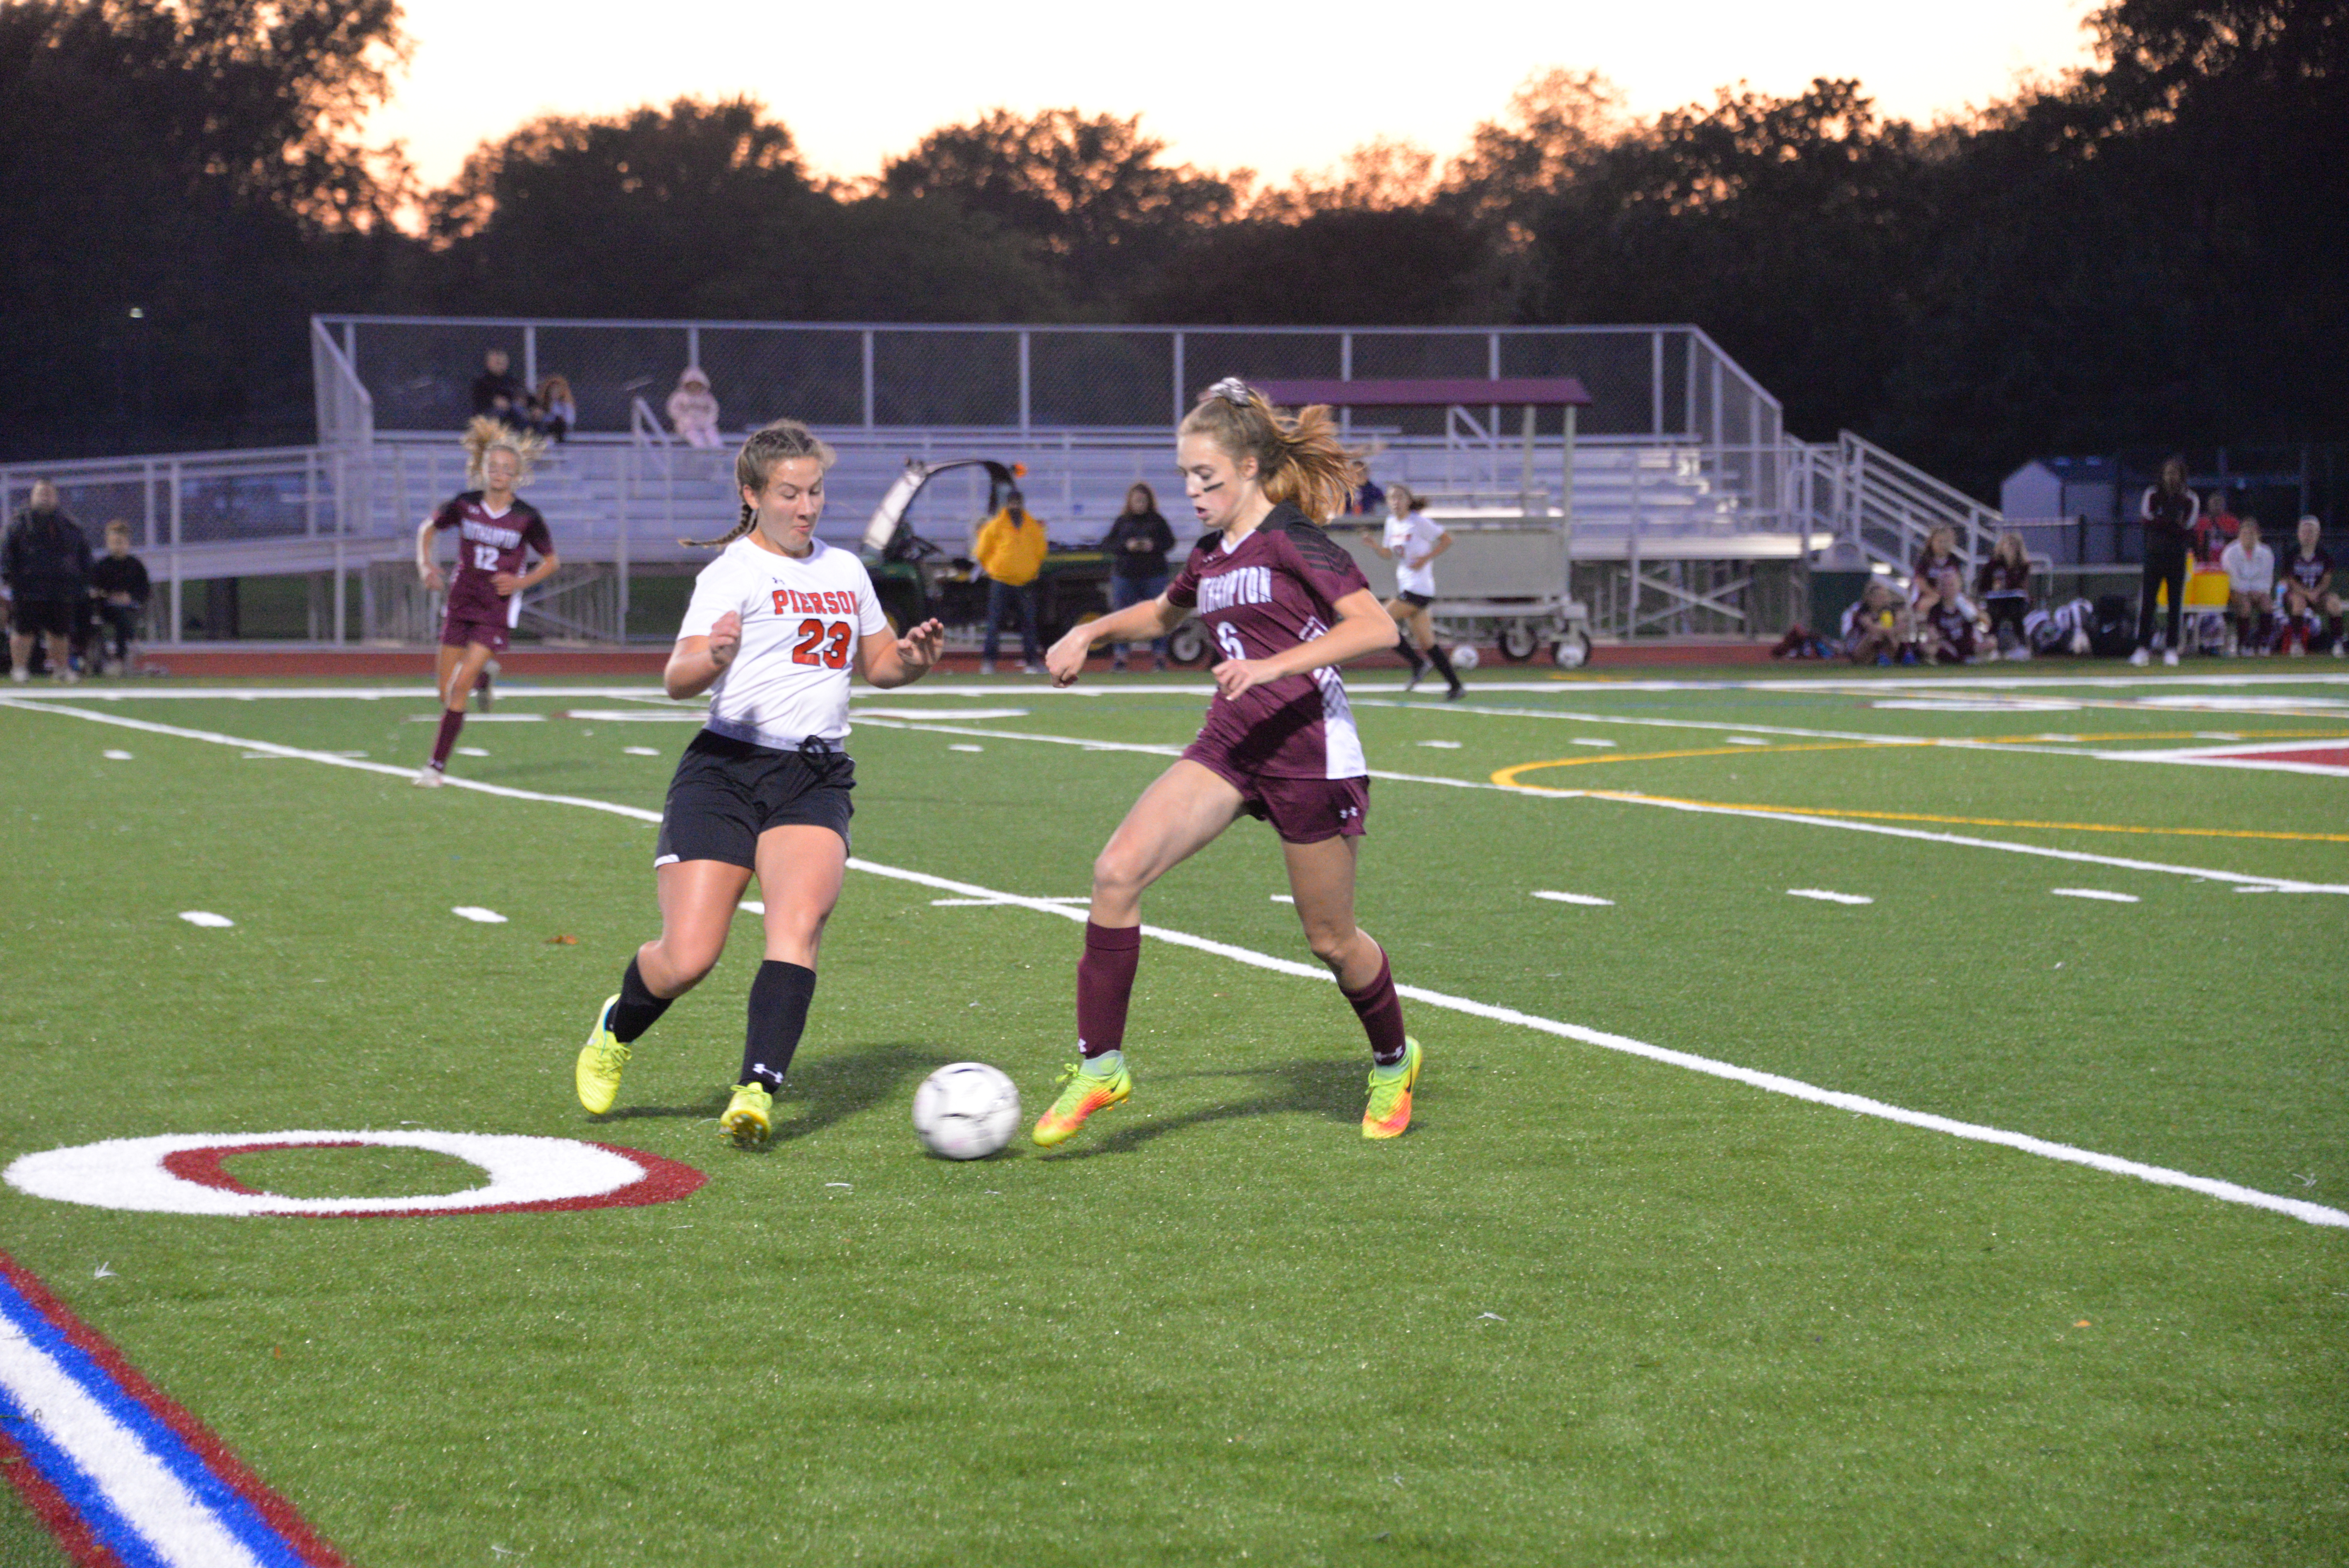 Southampton's Taylor Zukosky and Pierson's Elizabeth Hallock converge on the ball.